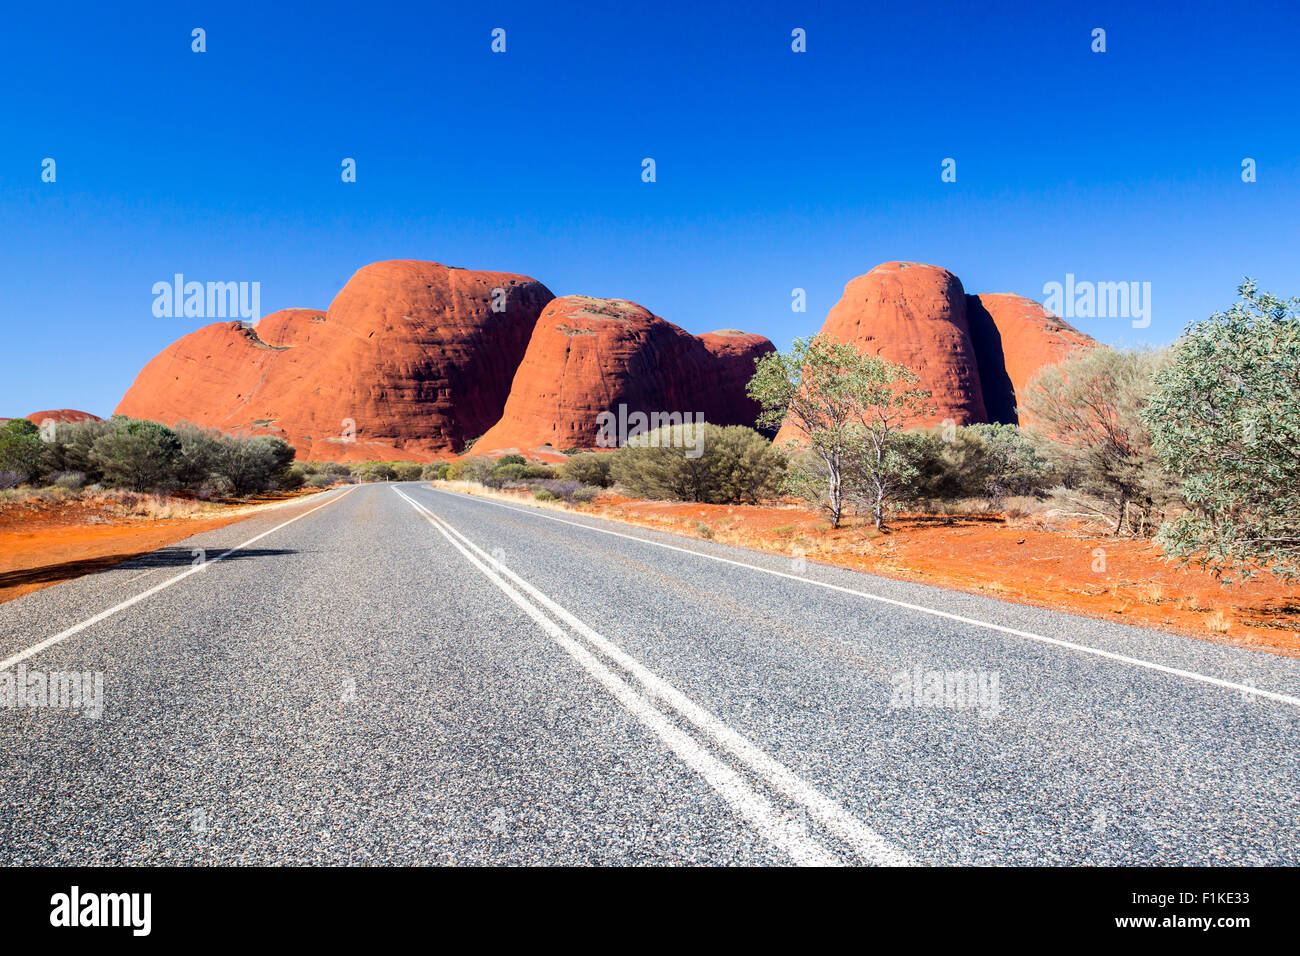 The Olgas and nearby roadscape in the Northern Territory, Australia Stock Photo